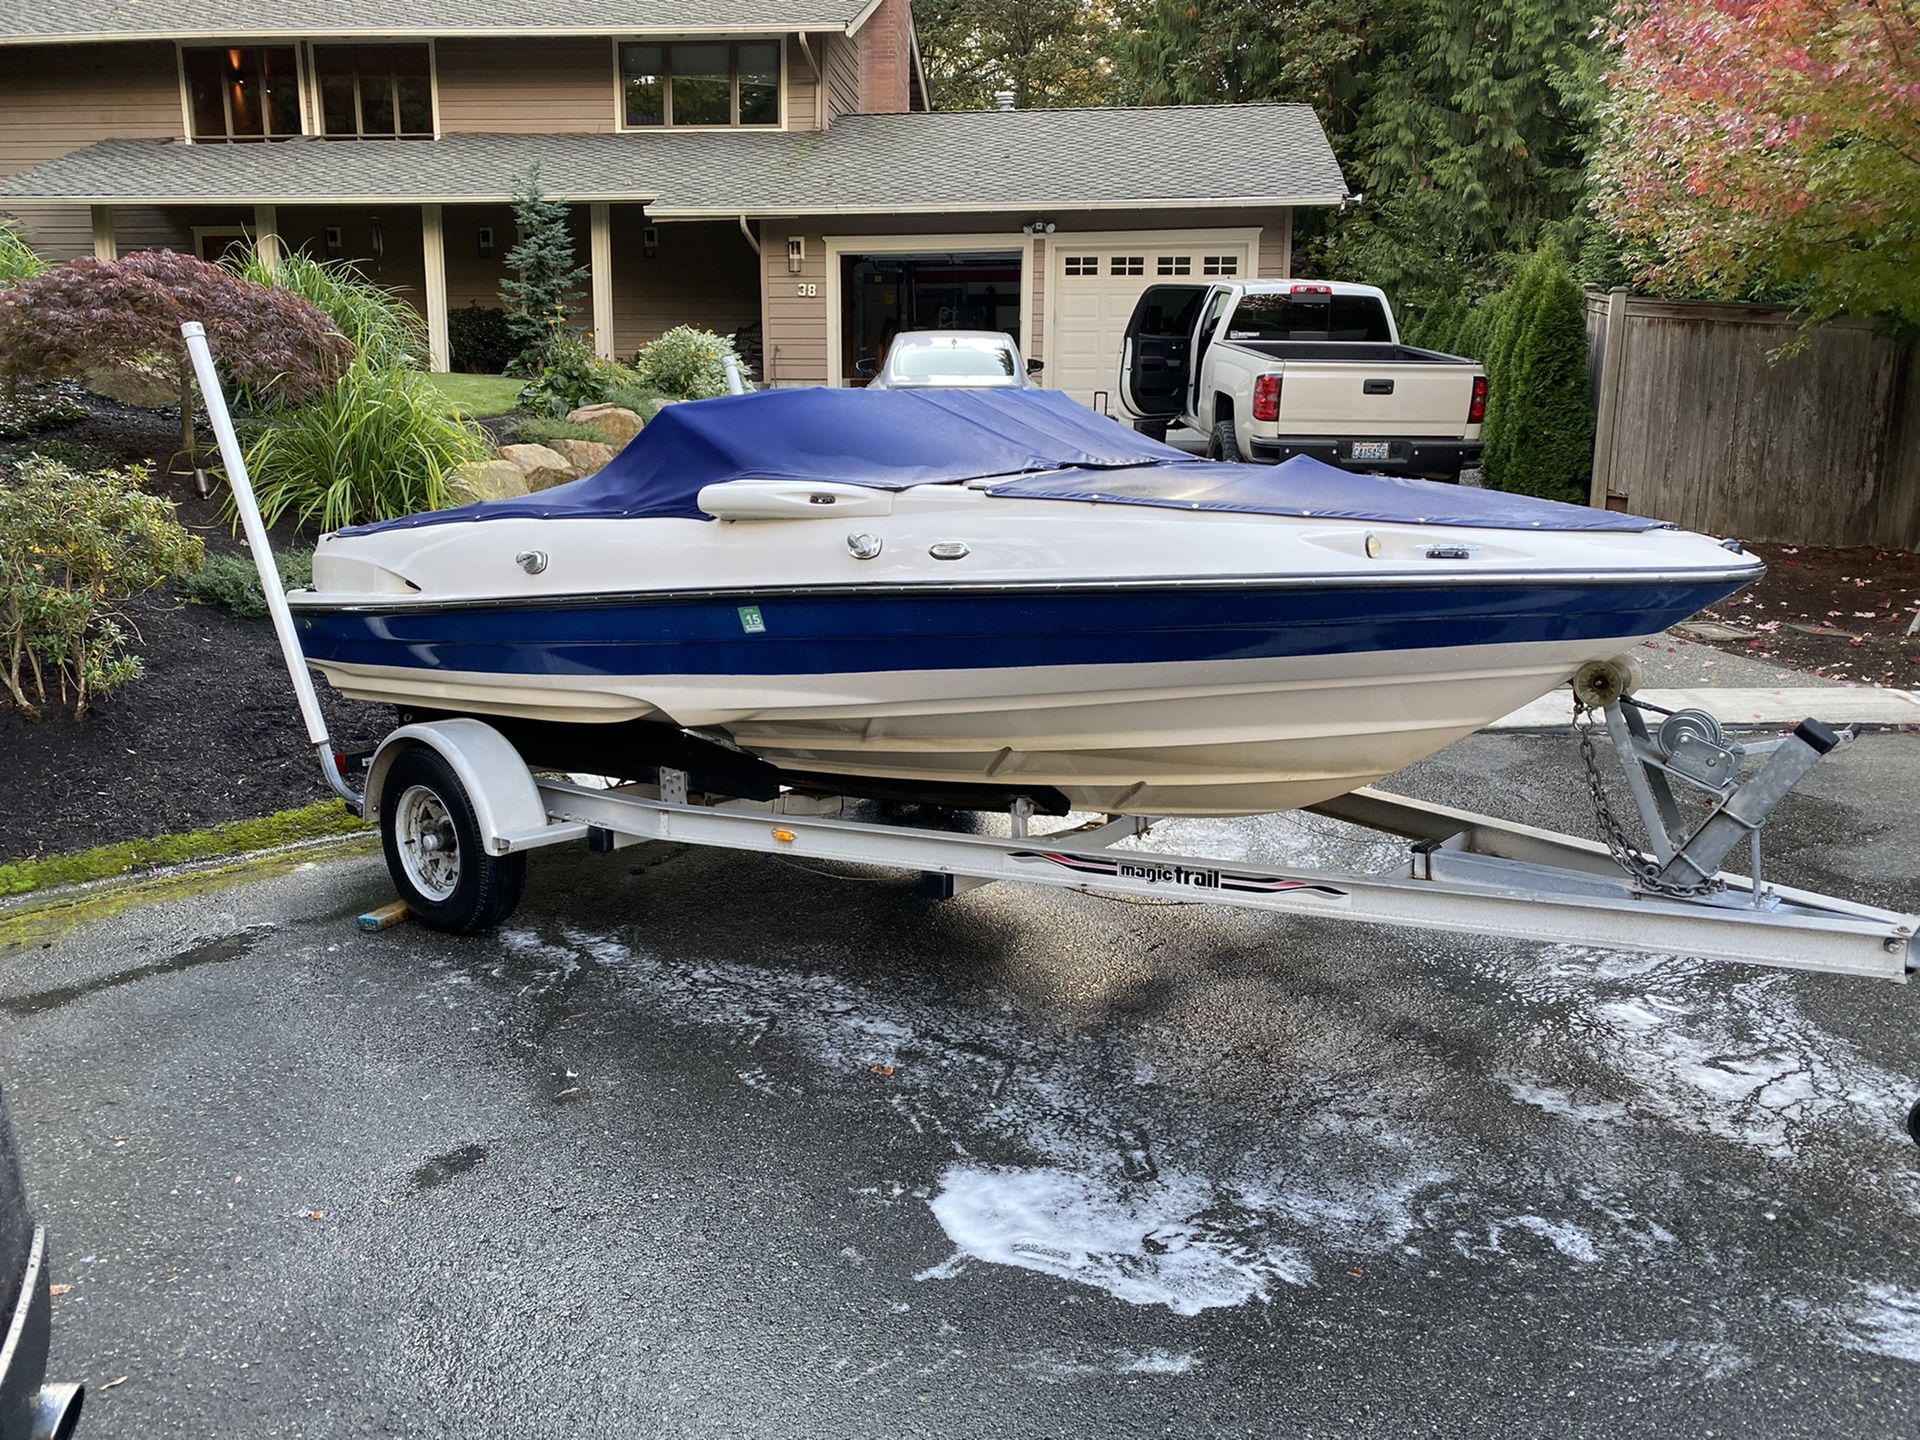 1700 Lrs regal with brand new motor! Priced to move